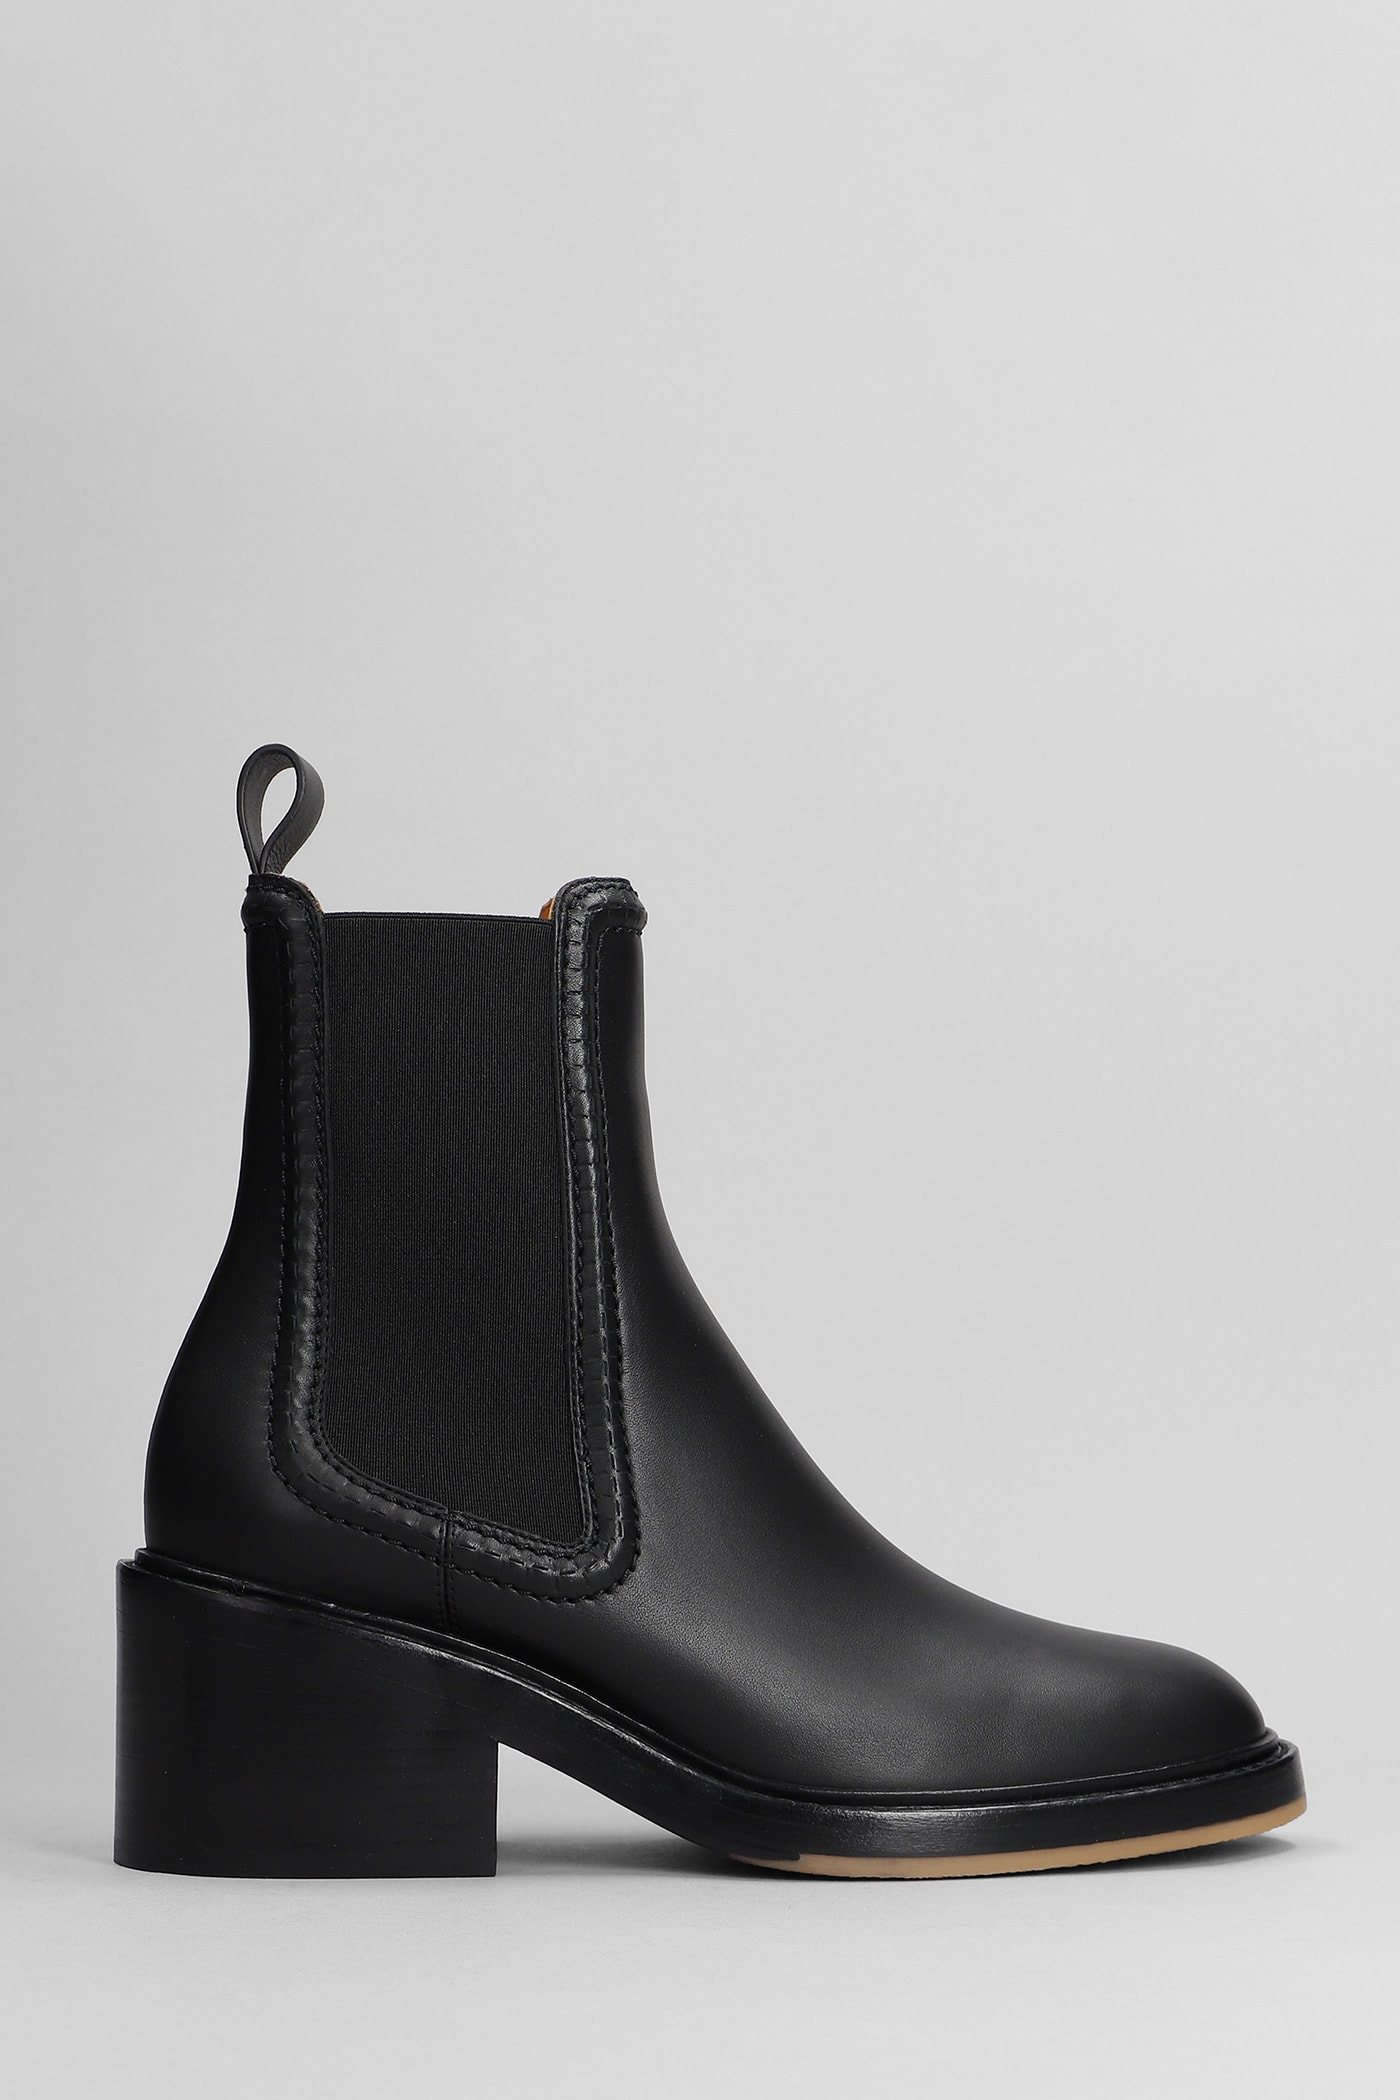 CHLOÉ MALLO ANKLE BOOTS IN BLACK LEATHER